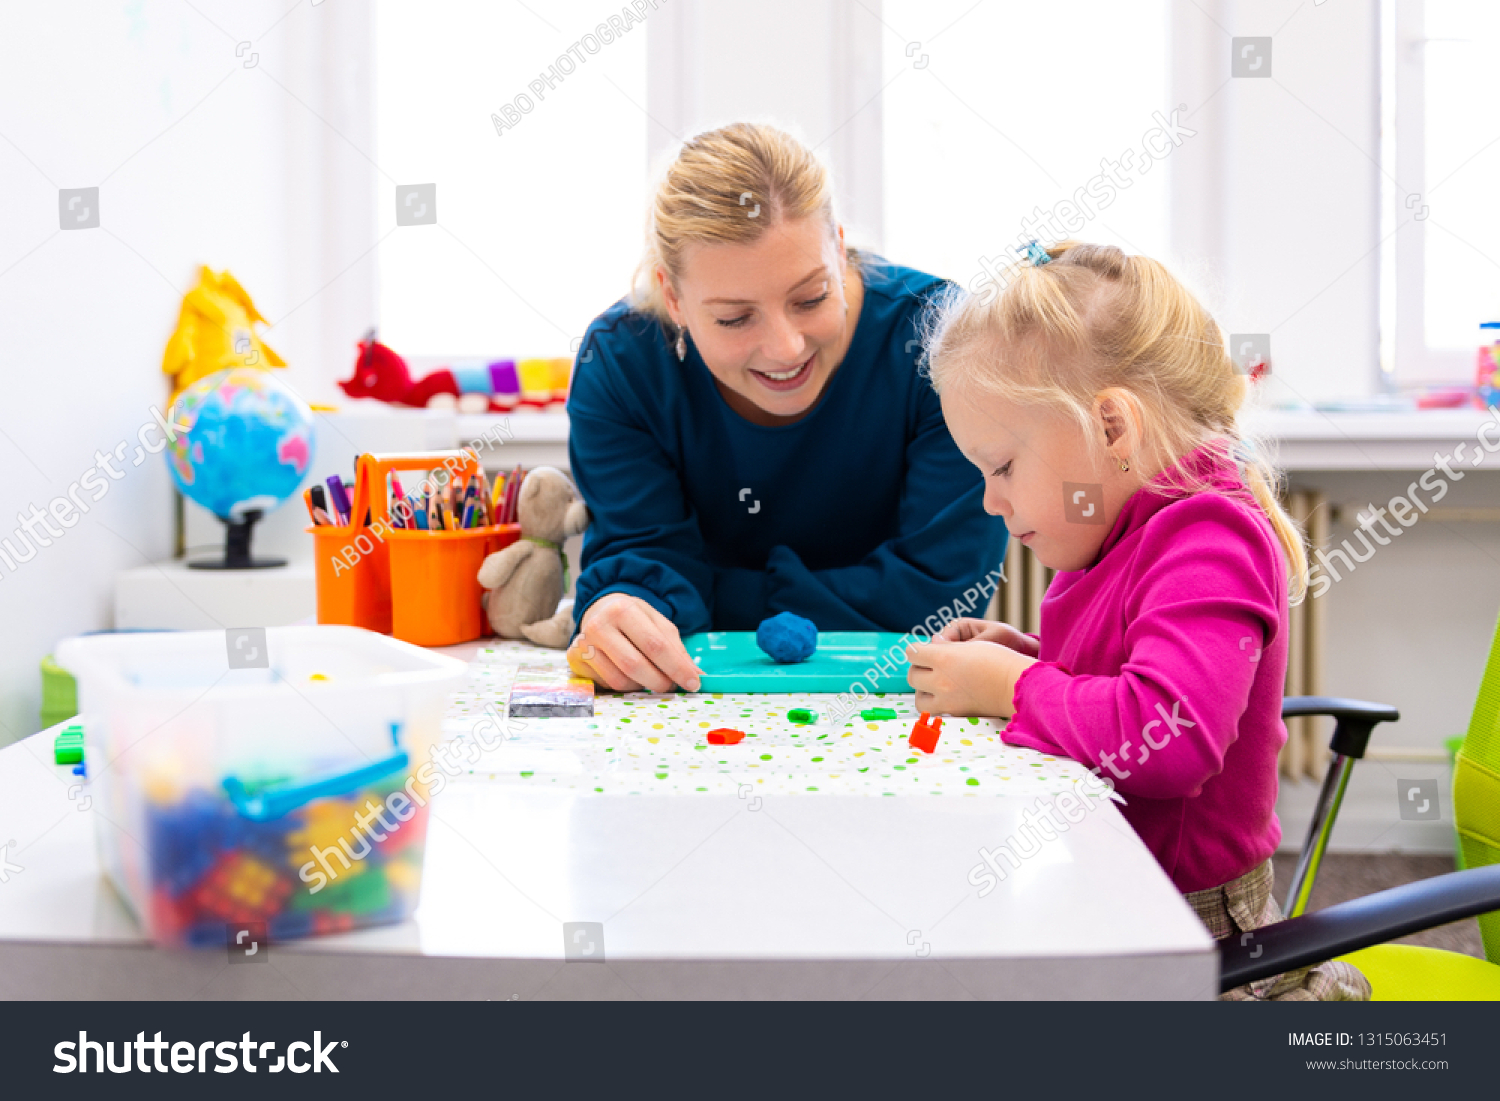 Toddler girl in child occupational therapy session doing sensory playful exercises with her therapist.  #1315063451